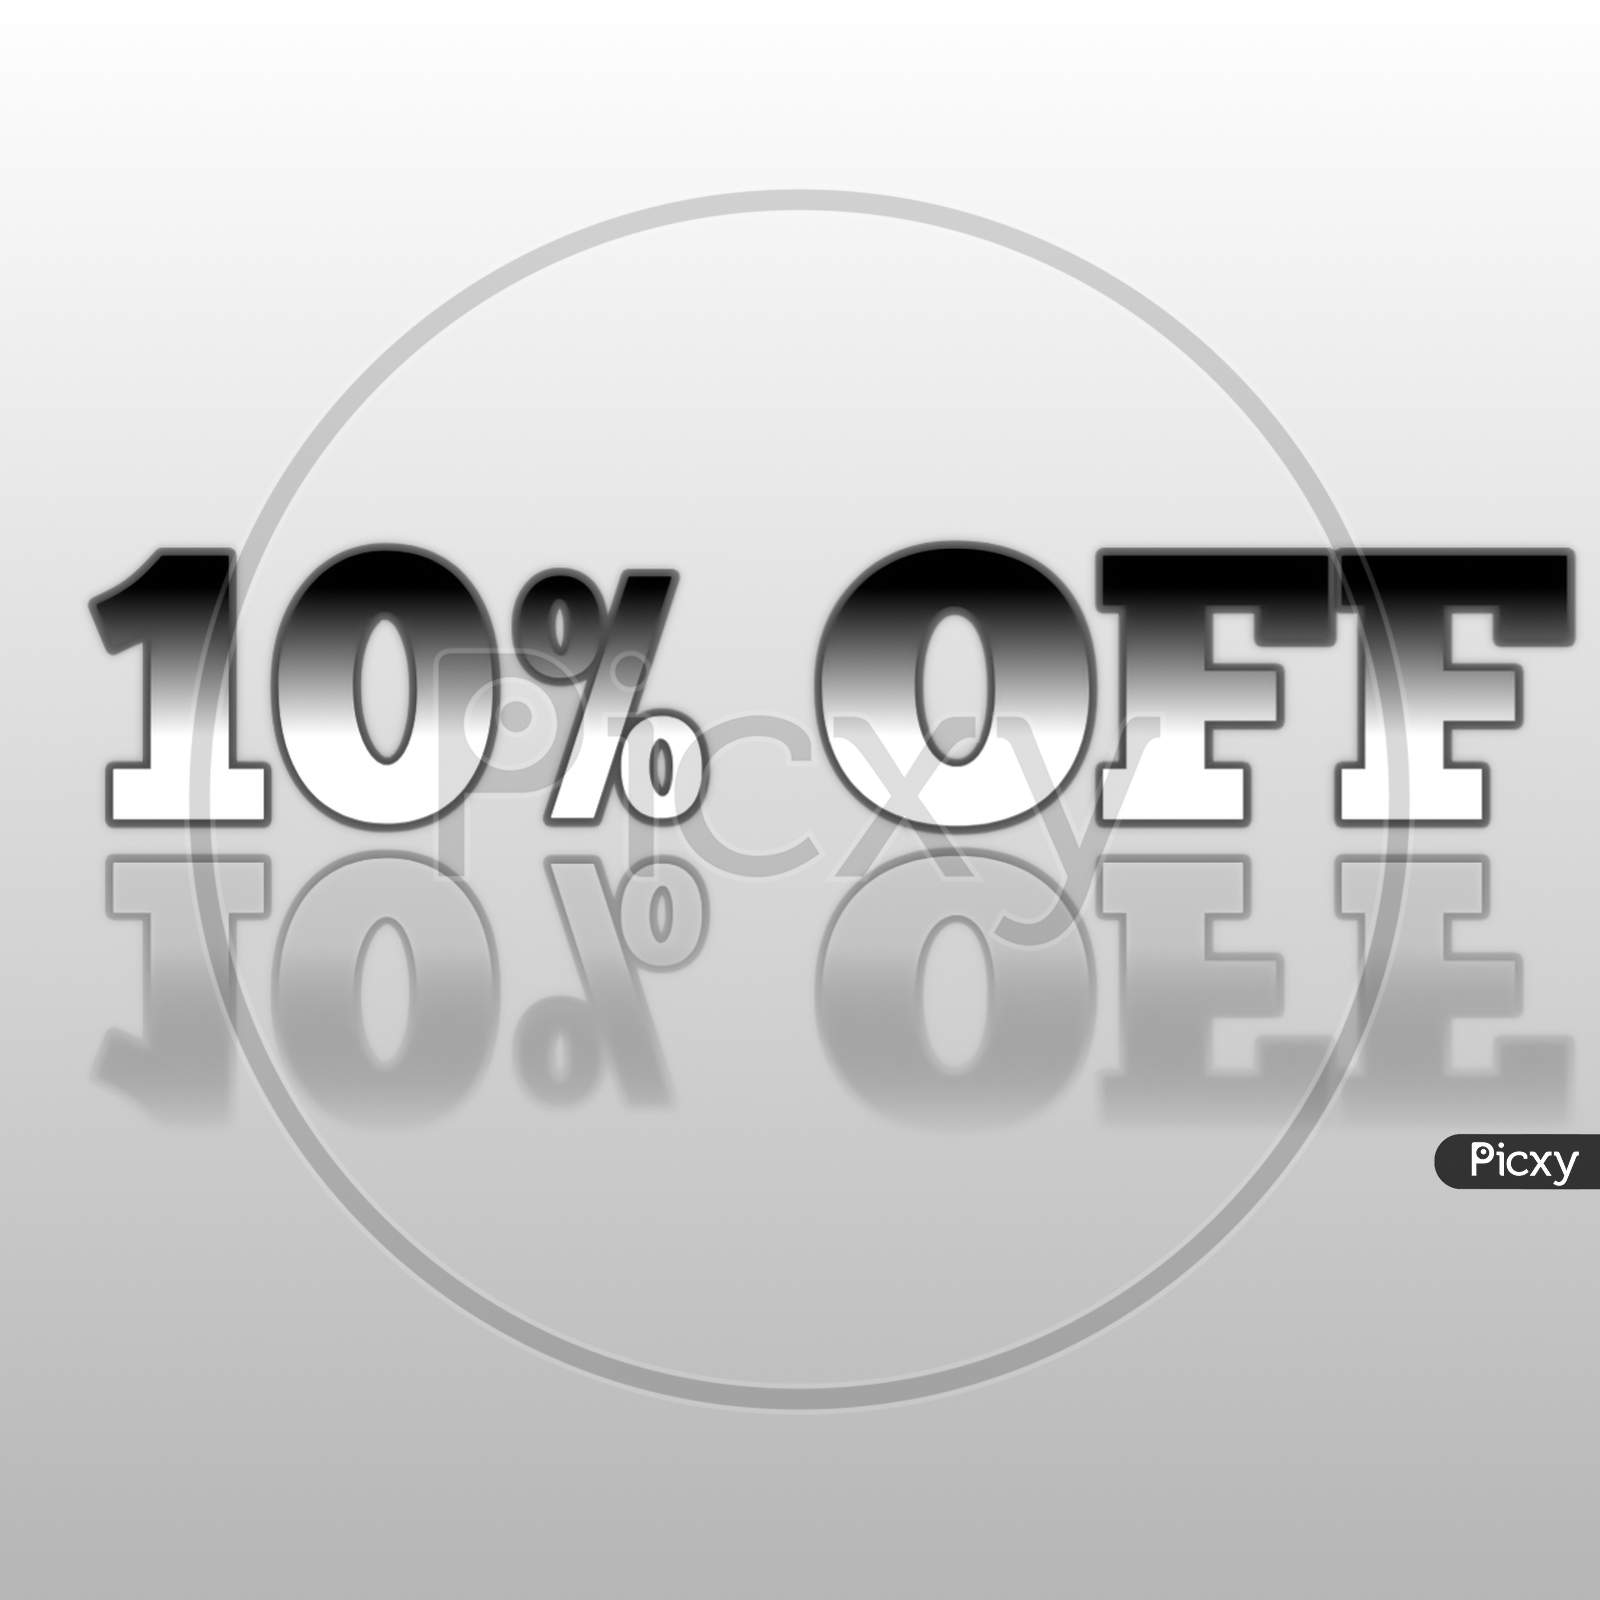 10% off white and black poster